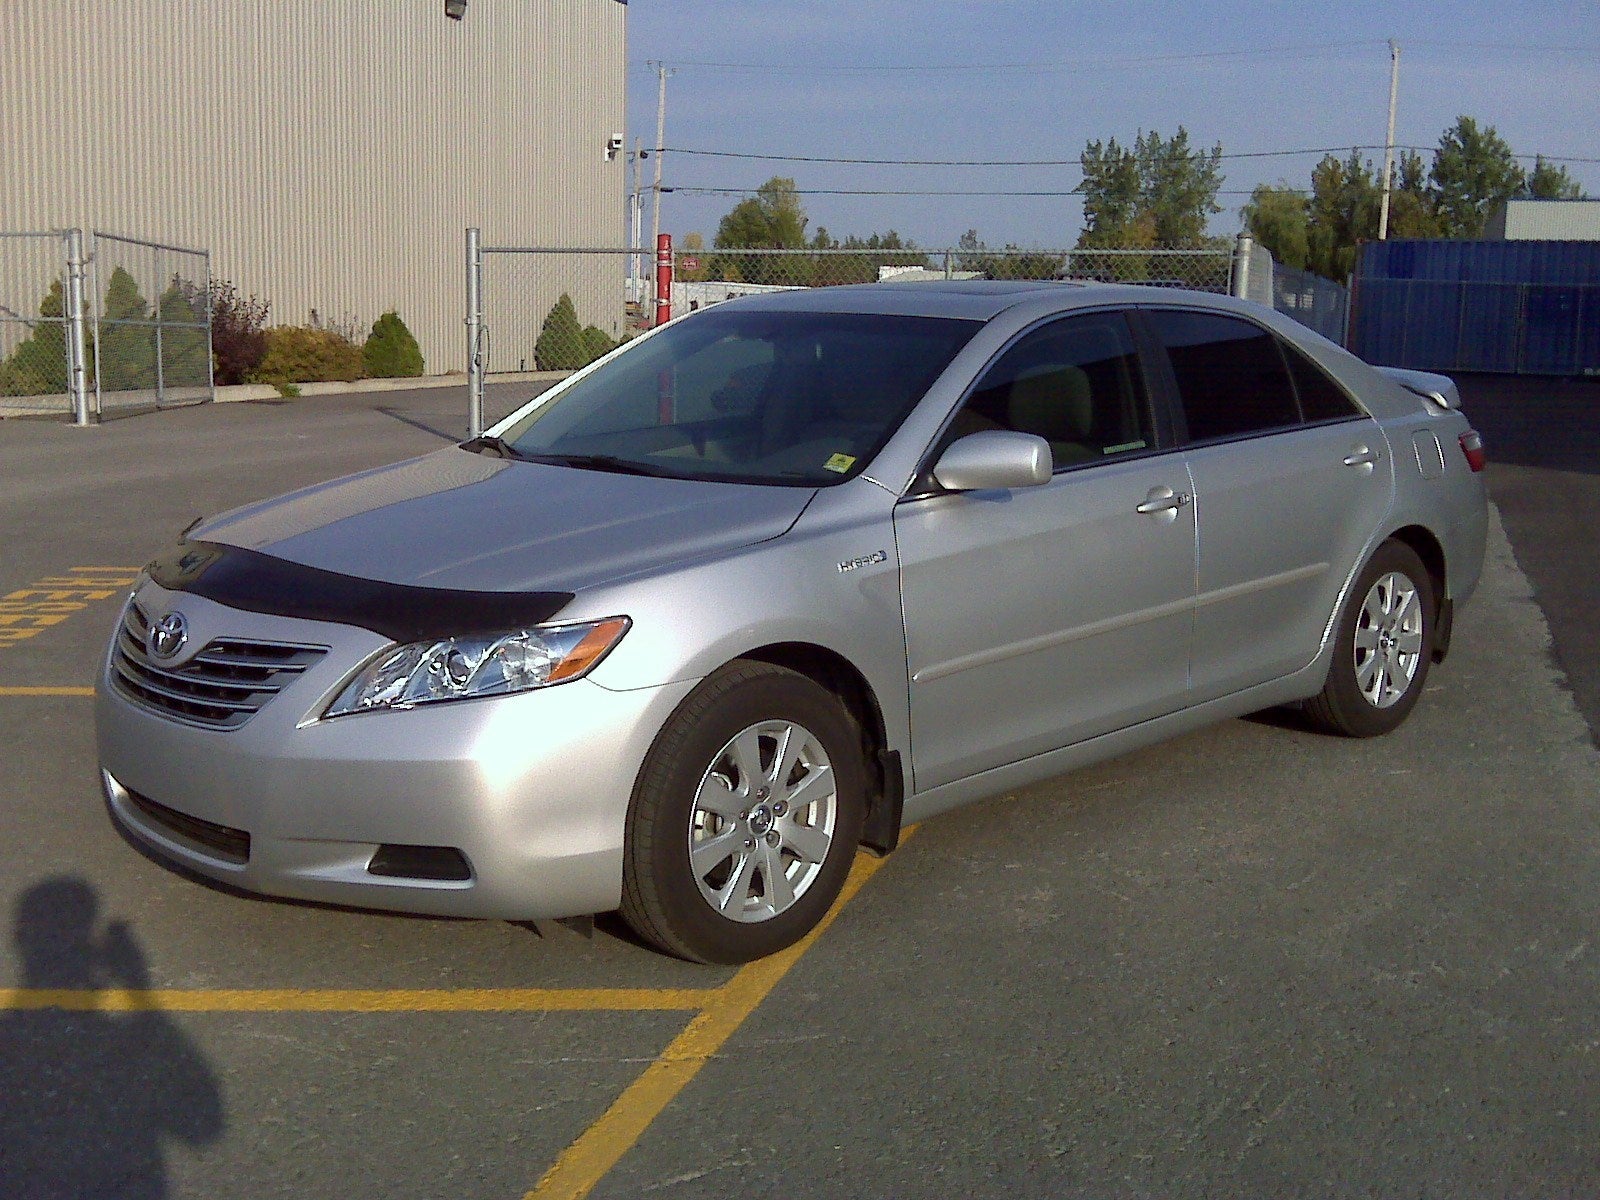 Picture of 2009 Toyota Camry Hybrid, exterior